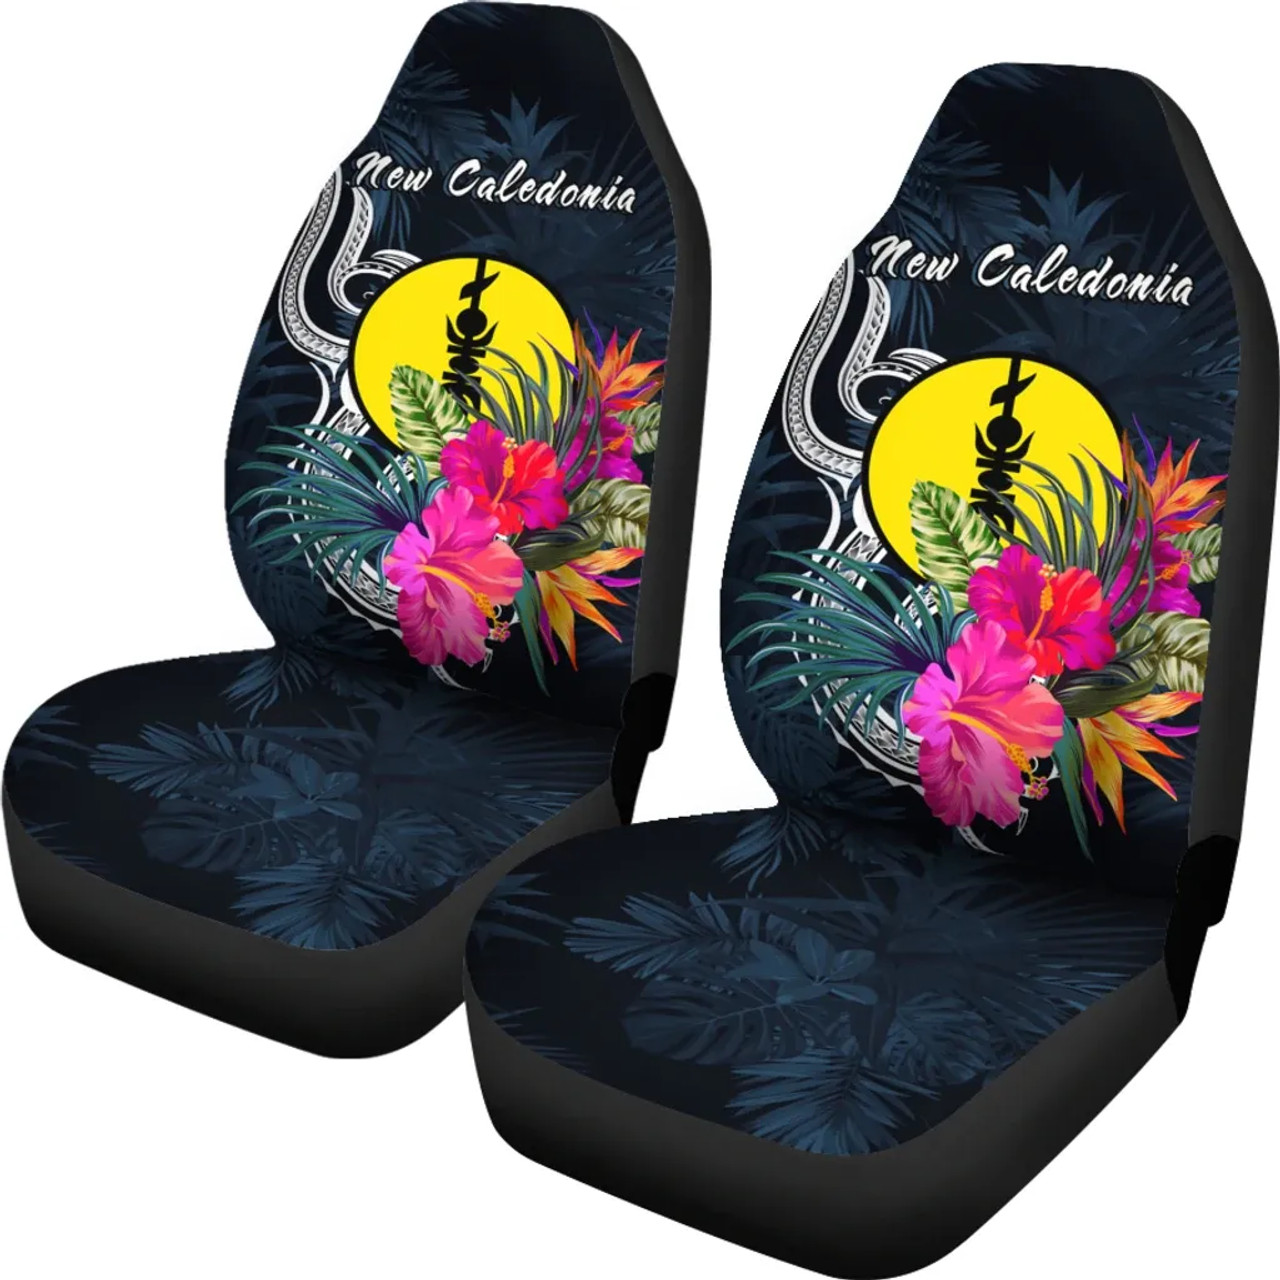 New Caledonia Polynesian Car Seat Covers - Tropical Flower